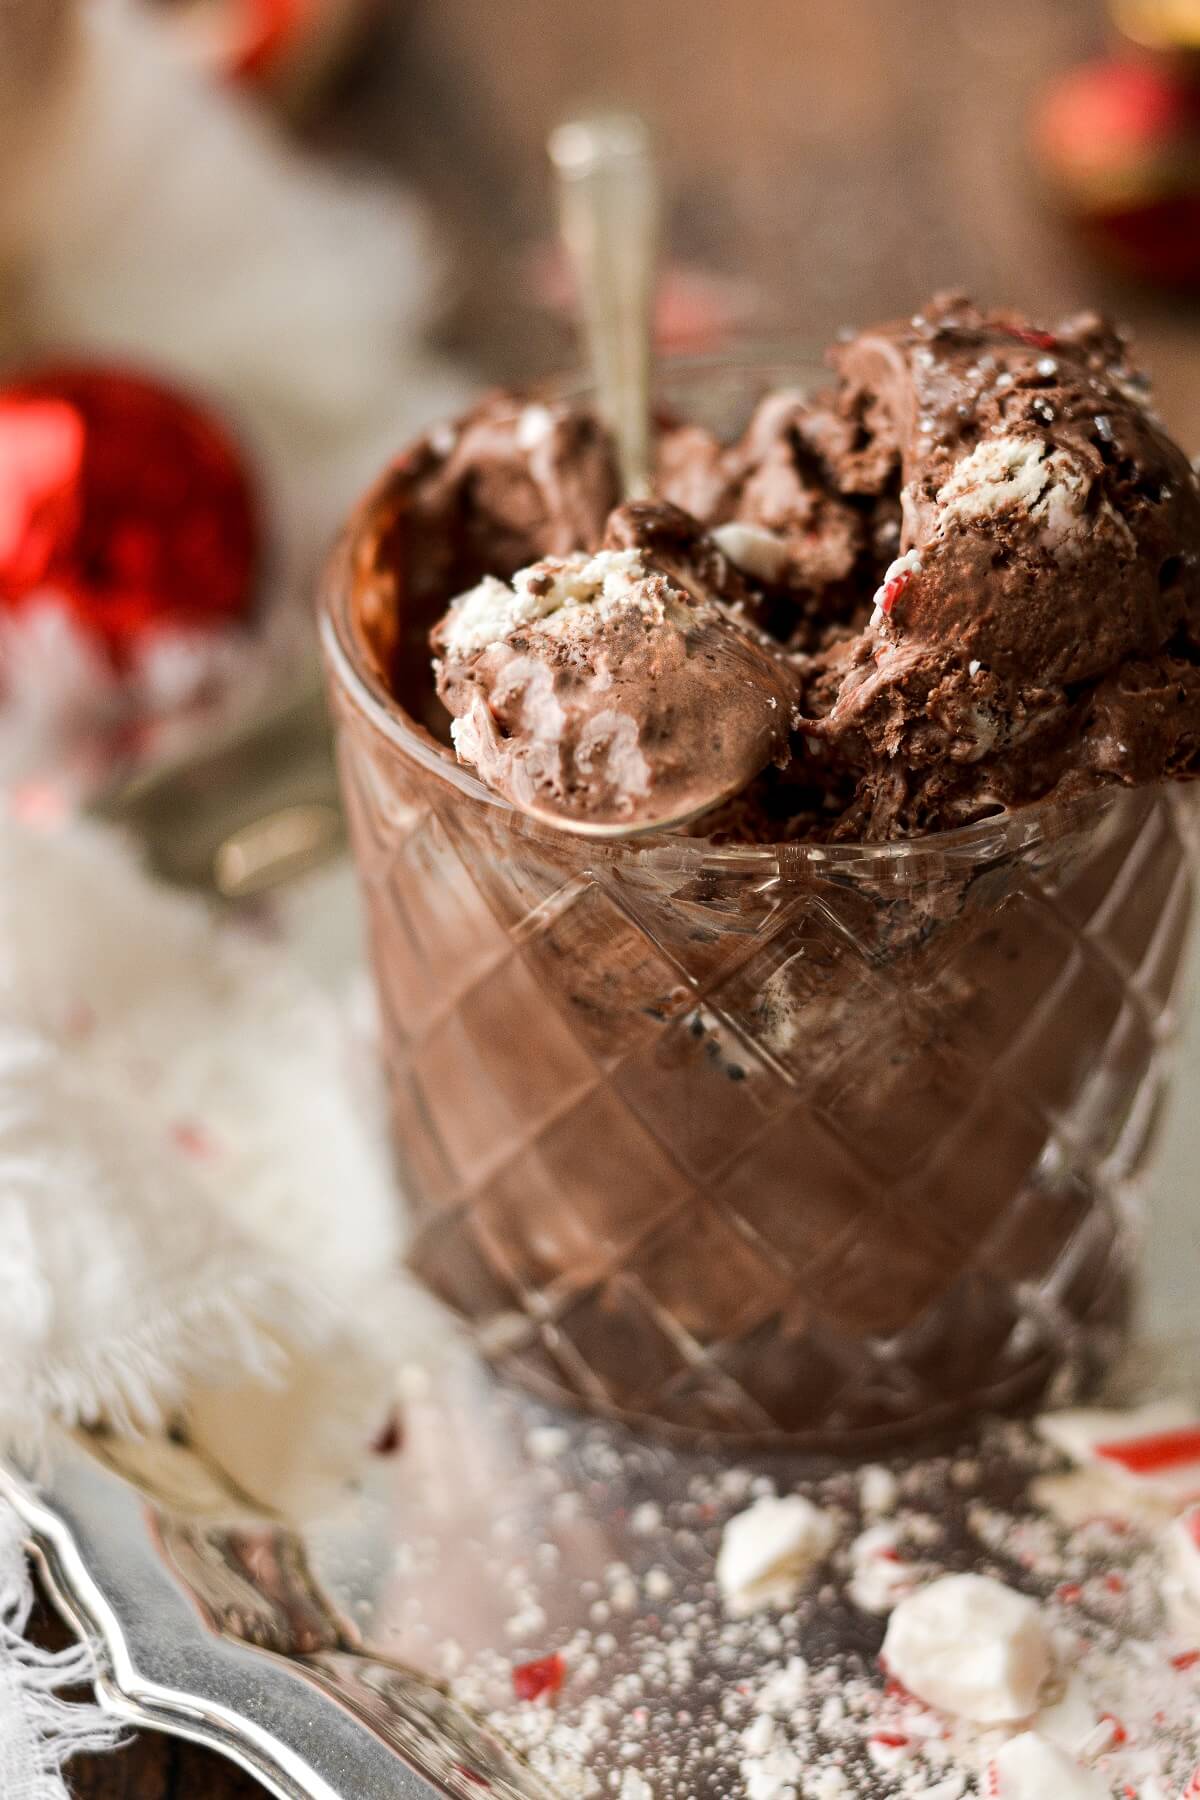 Chocolate peppermint ice cream with a bite taken.